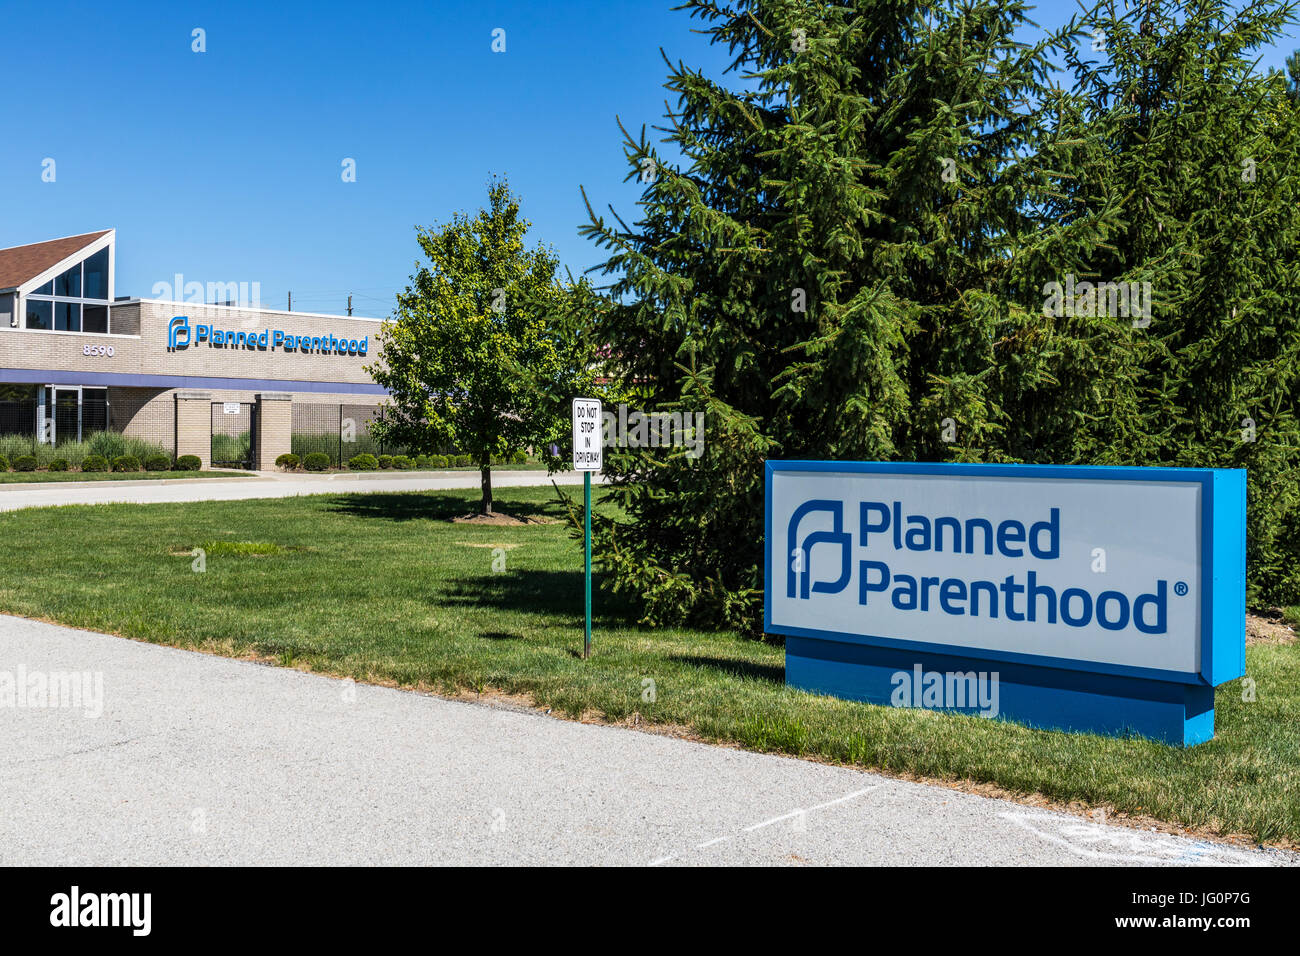 Indianapolis - Circa July 2017: Planned Parenthood Location. Planned Parenthood Provides Reproductive Health Services in the US VIII Stock Photo